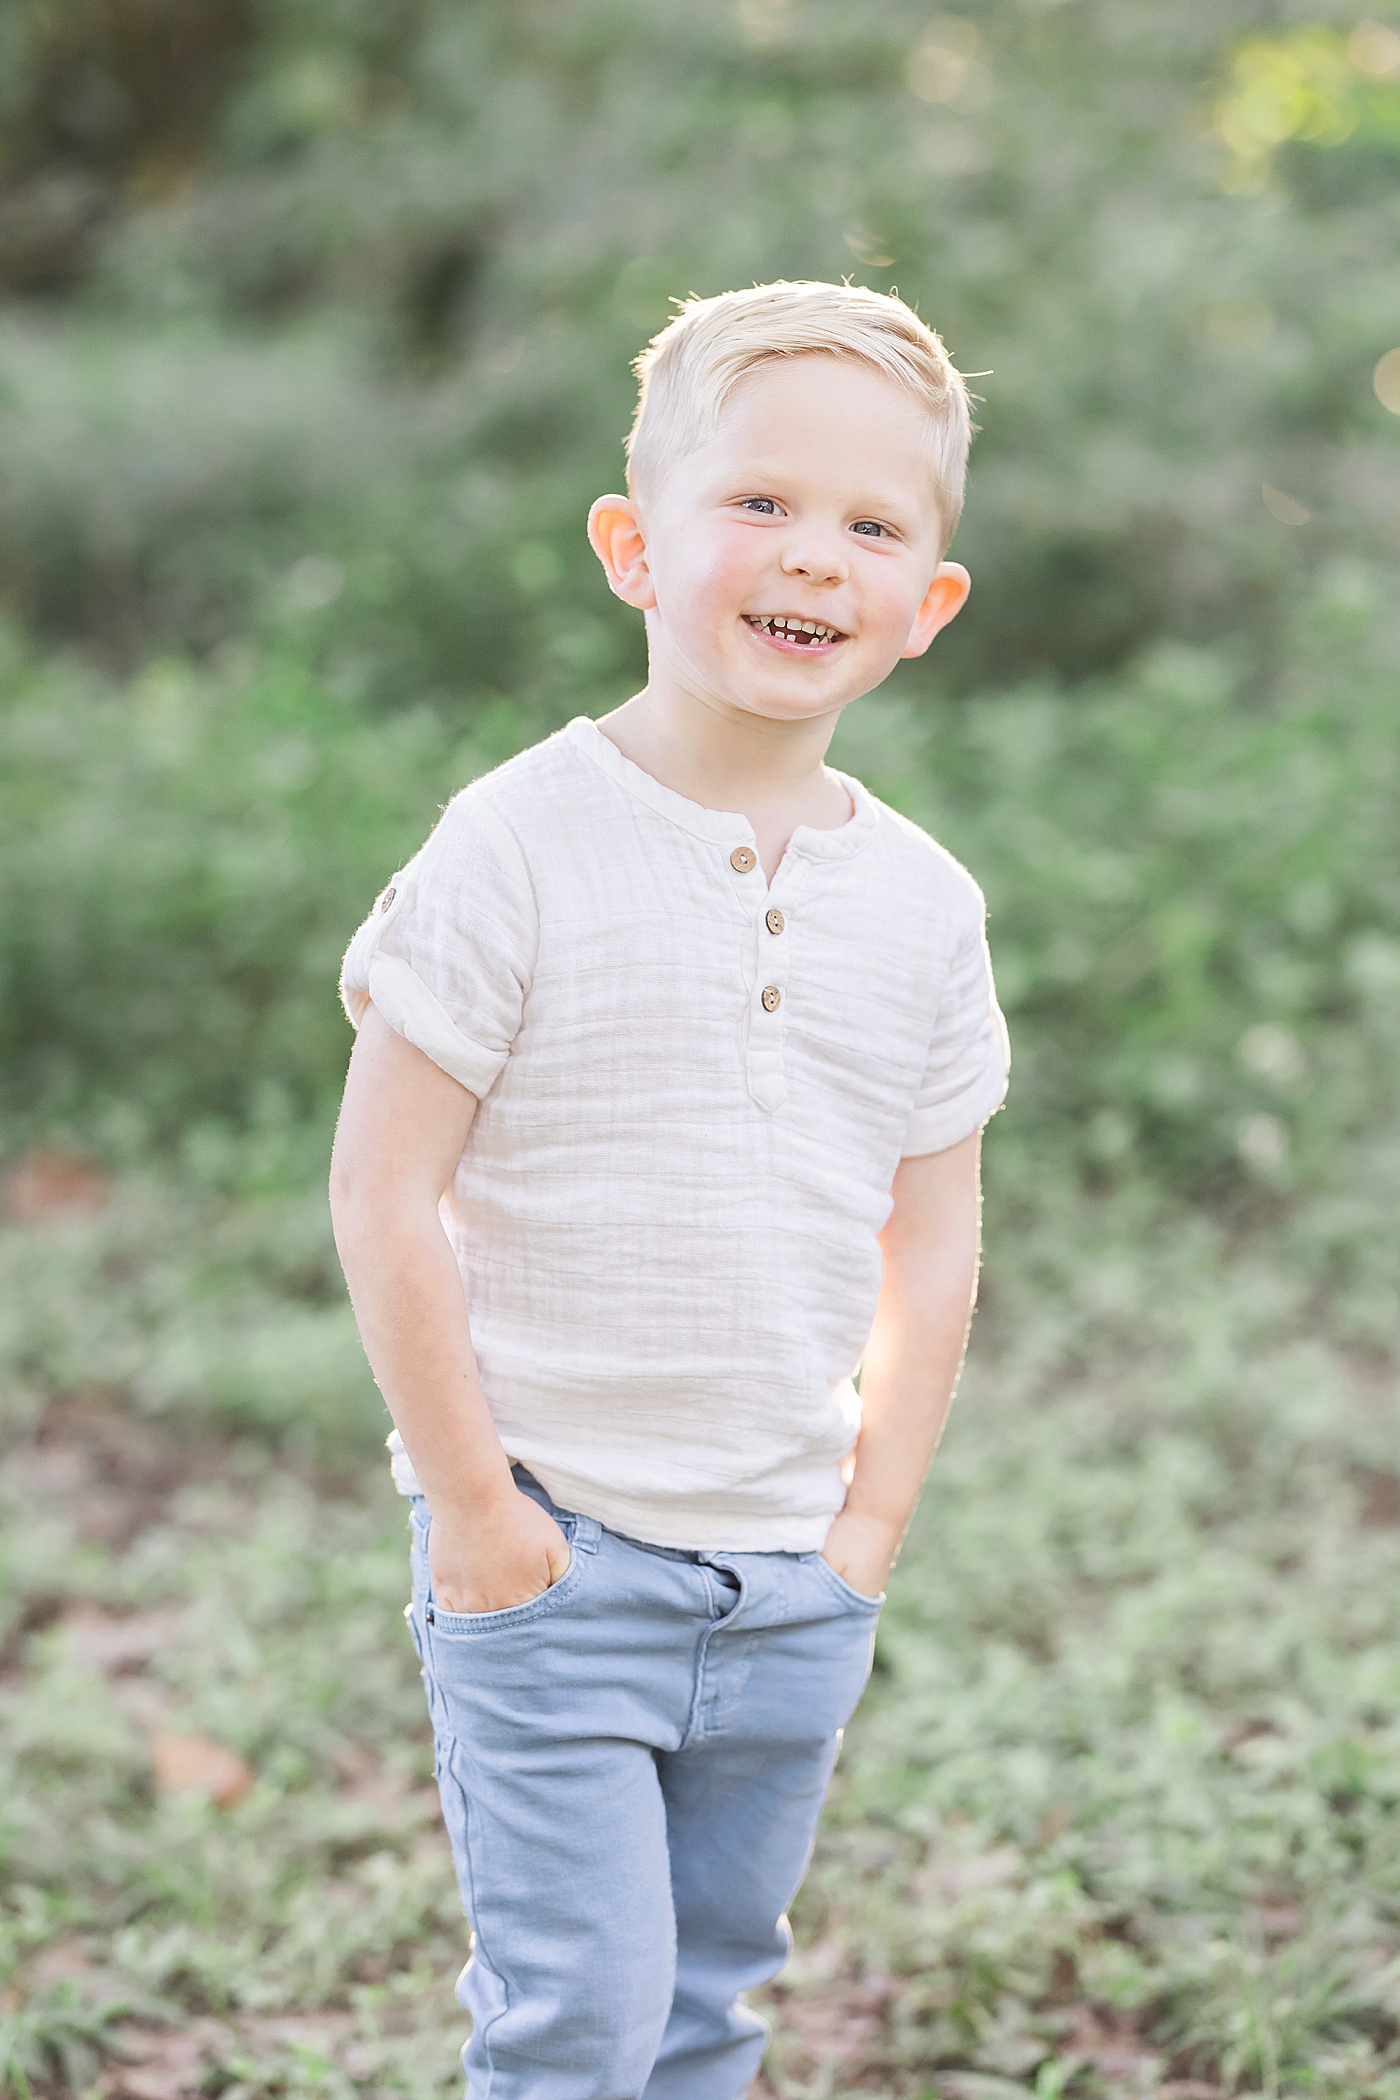 Toddler smiling for portrait during outdoor session in Houston. Photo by Fresh Light Photography